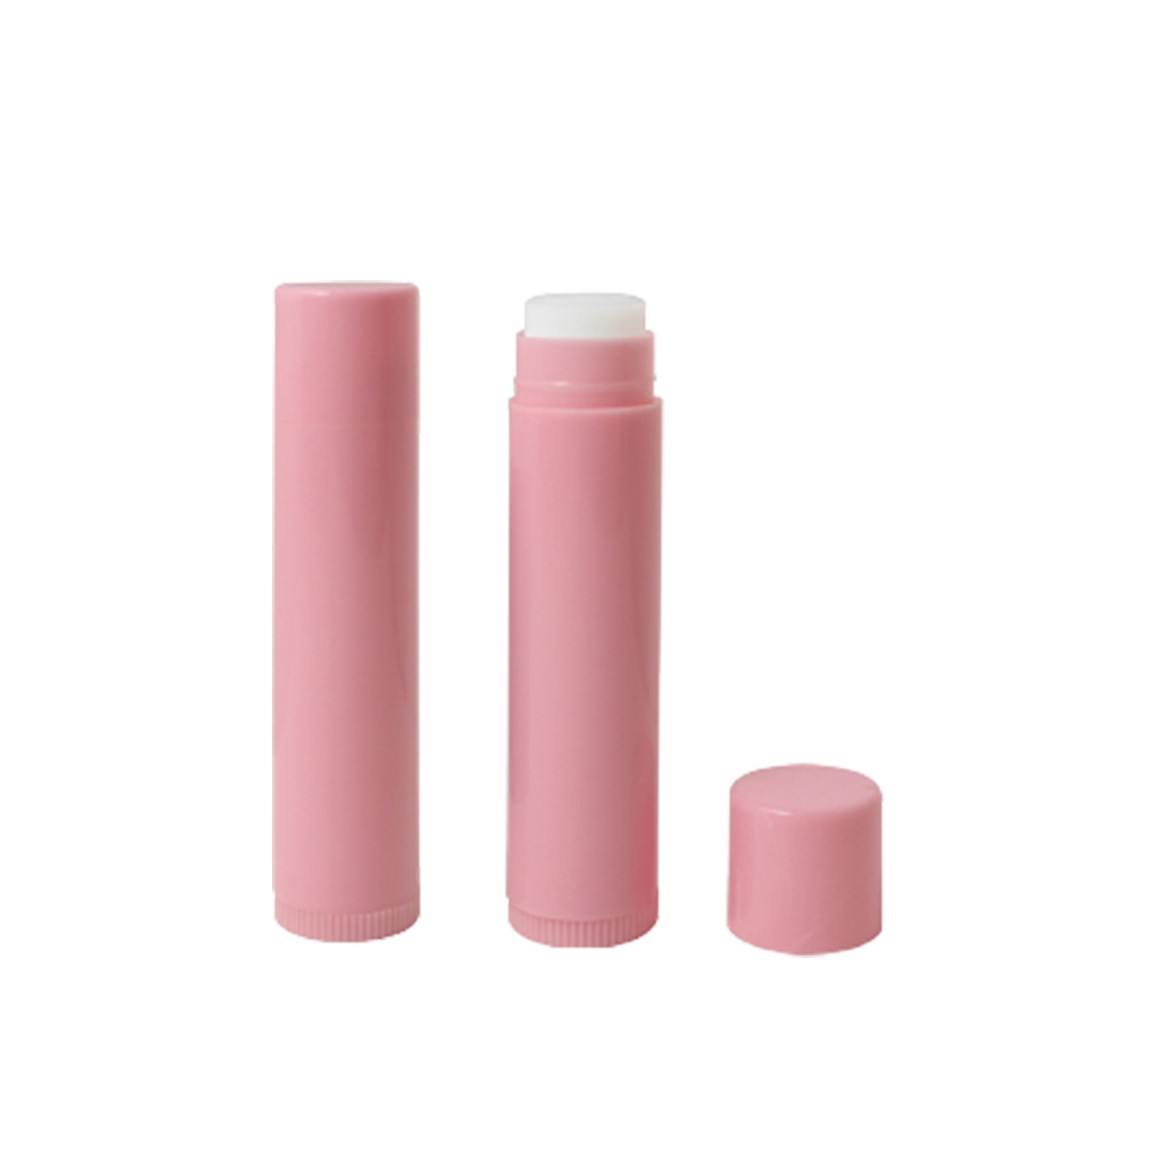 Cosmetics Complexion Fix Oil-Free Concealer, Highlighter, &amp; Under Eye Corrector To Help Conceal Dark Circles And Blemishes